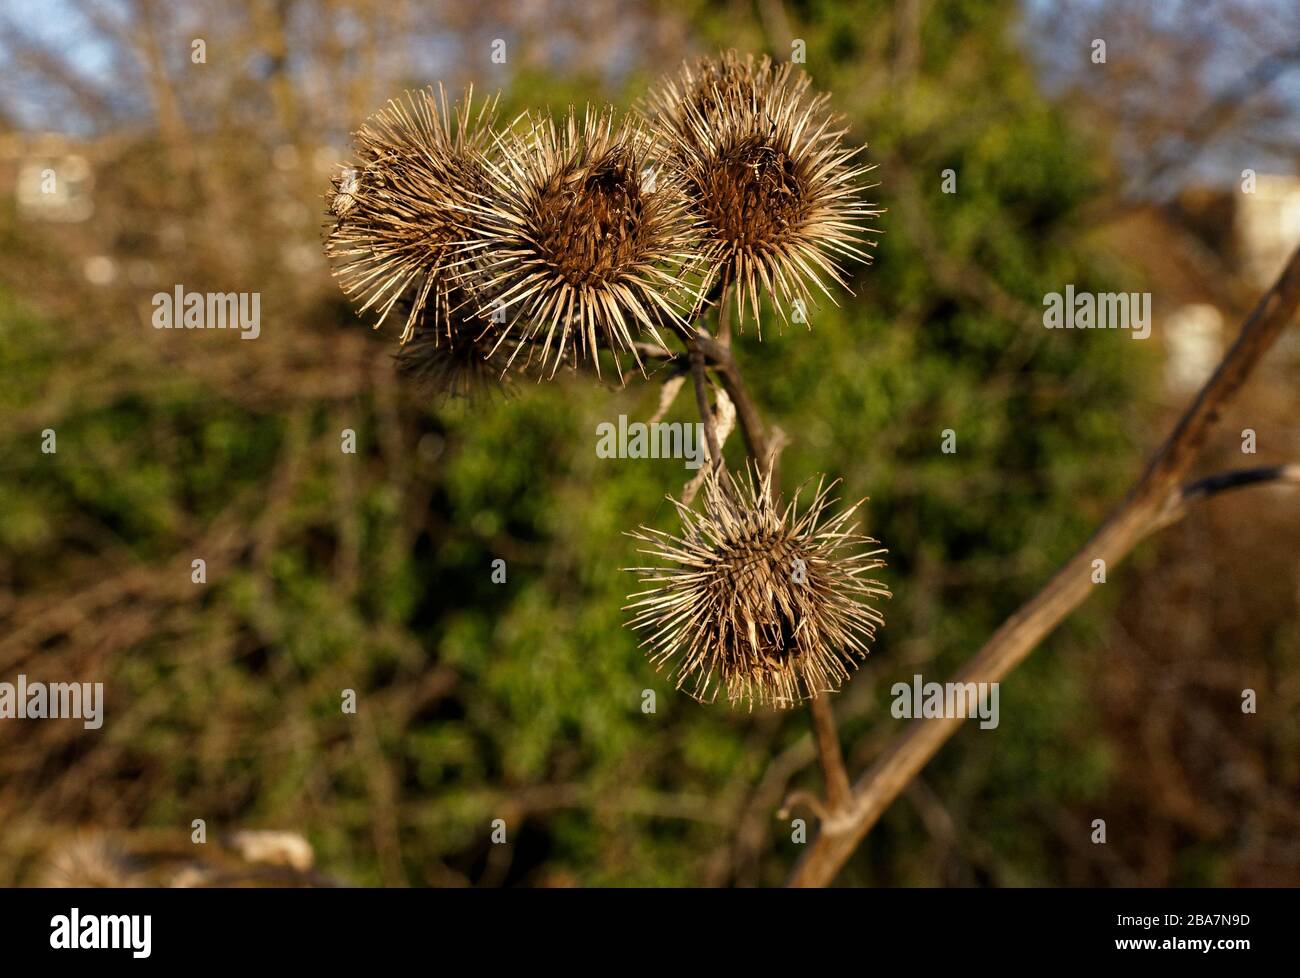 The hooked burrs of the head of the Lesser Burdock give it the name sticky bob, Stock Photo